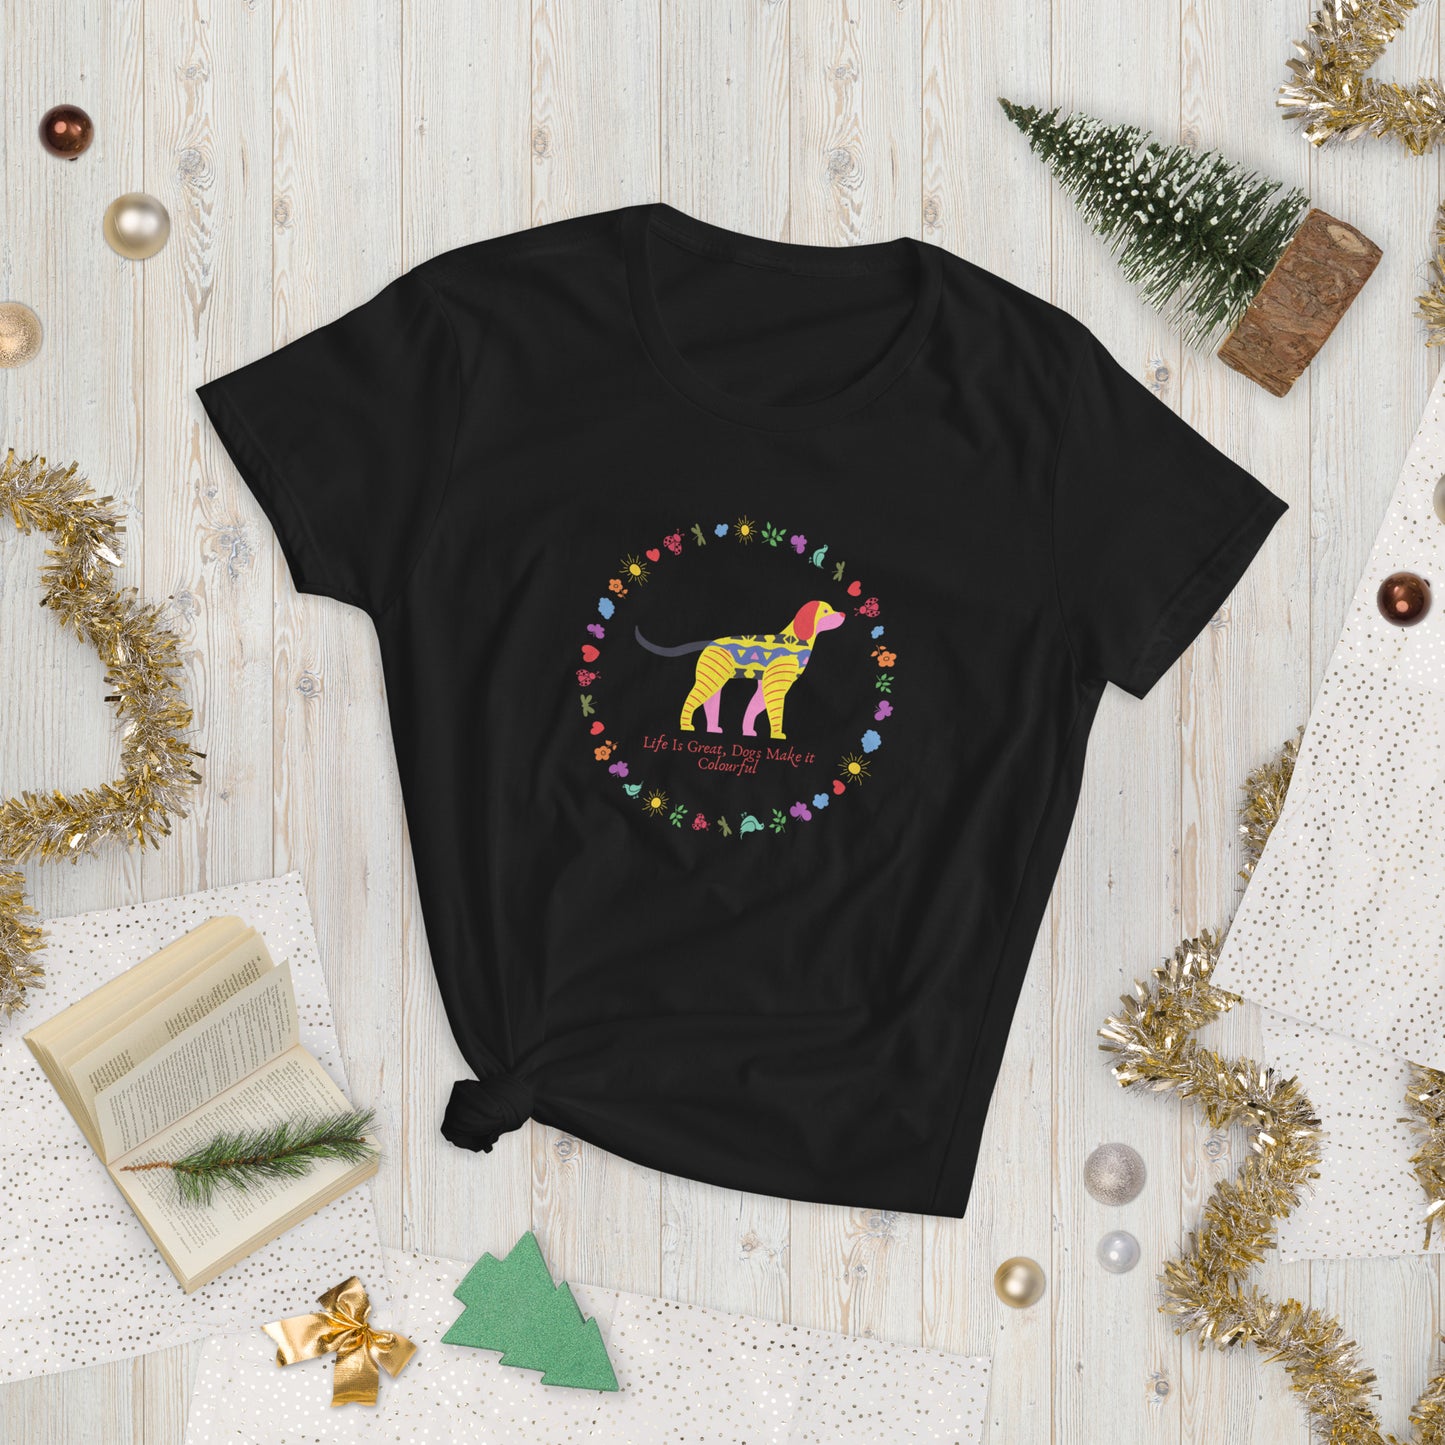 Life Is Colourful With Dogs Women's T-Shirt, Dog Mom Shirt